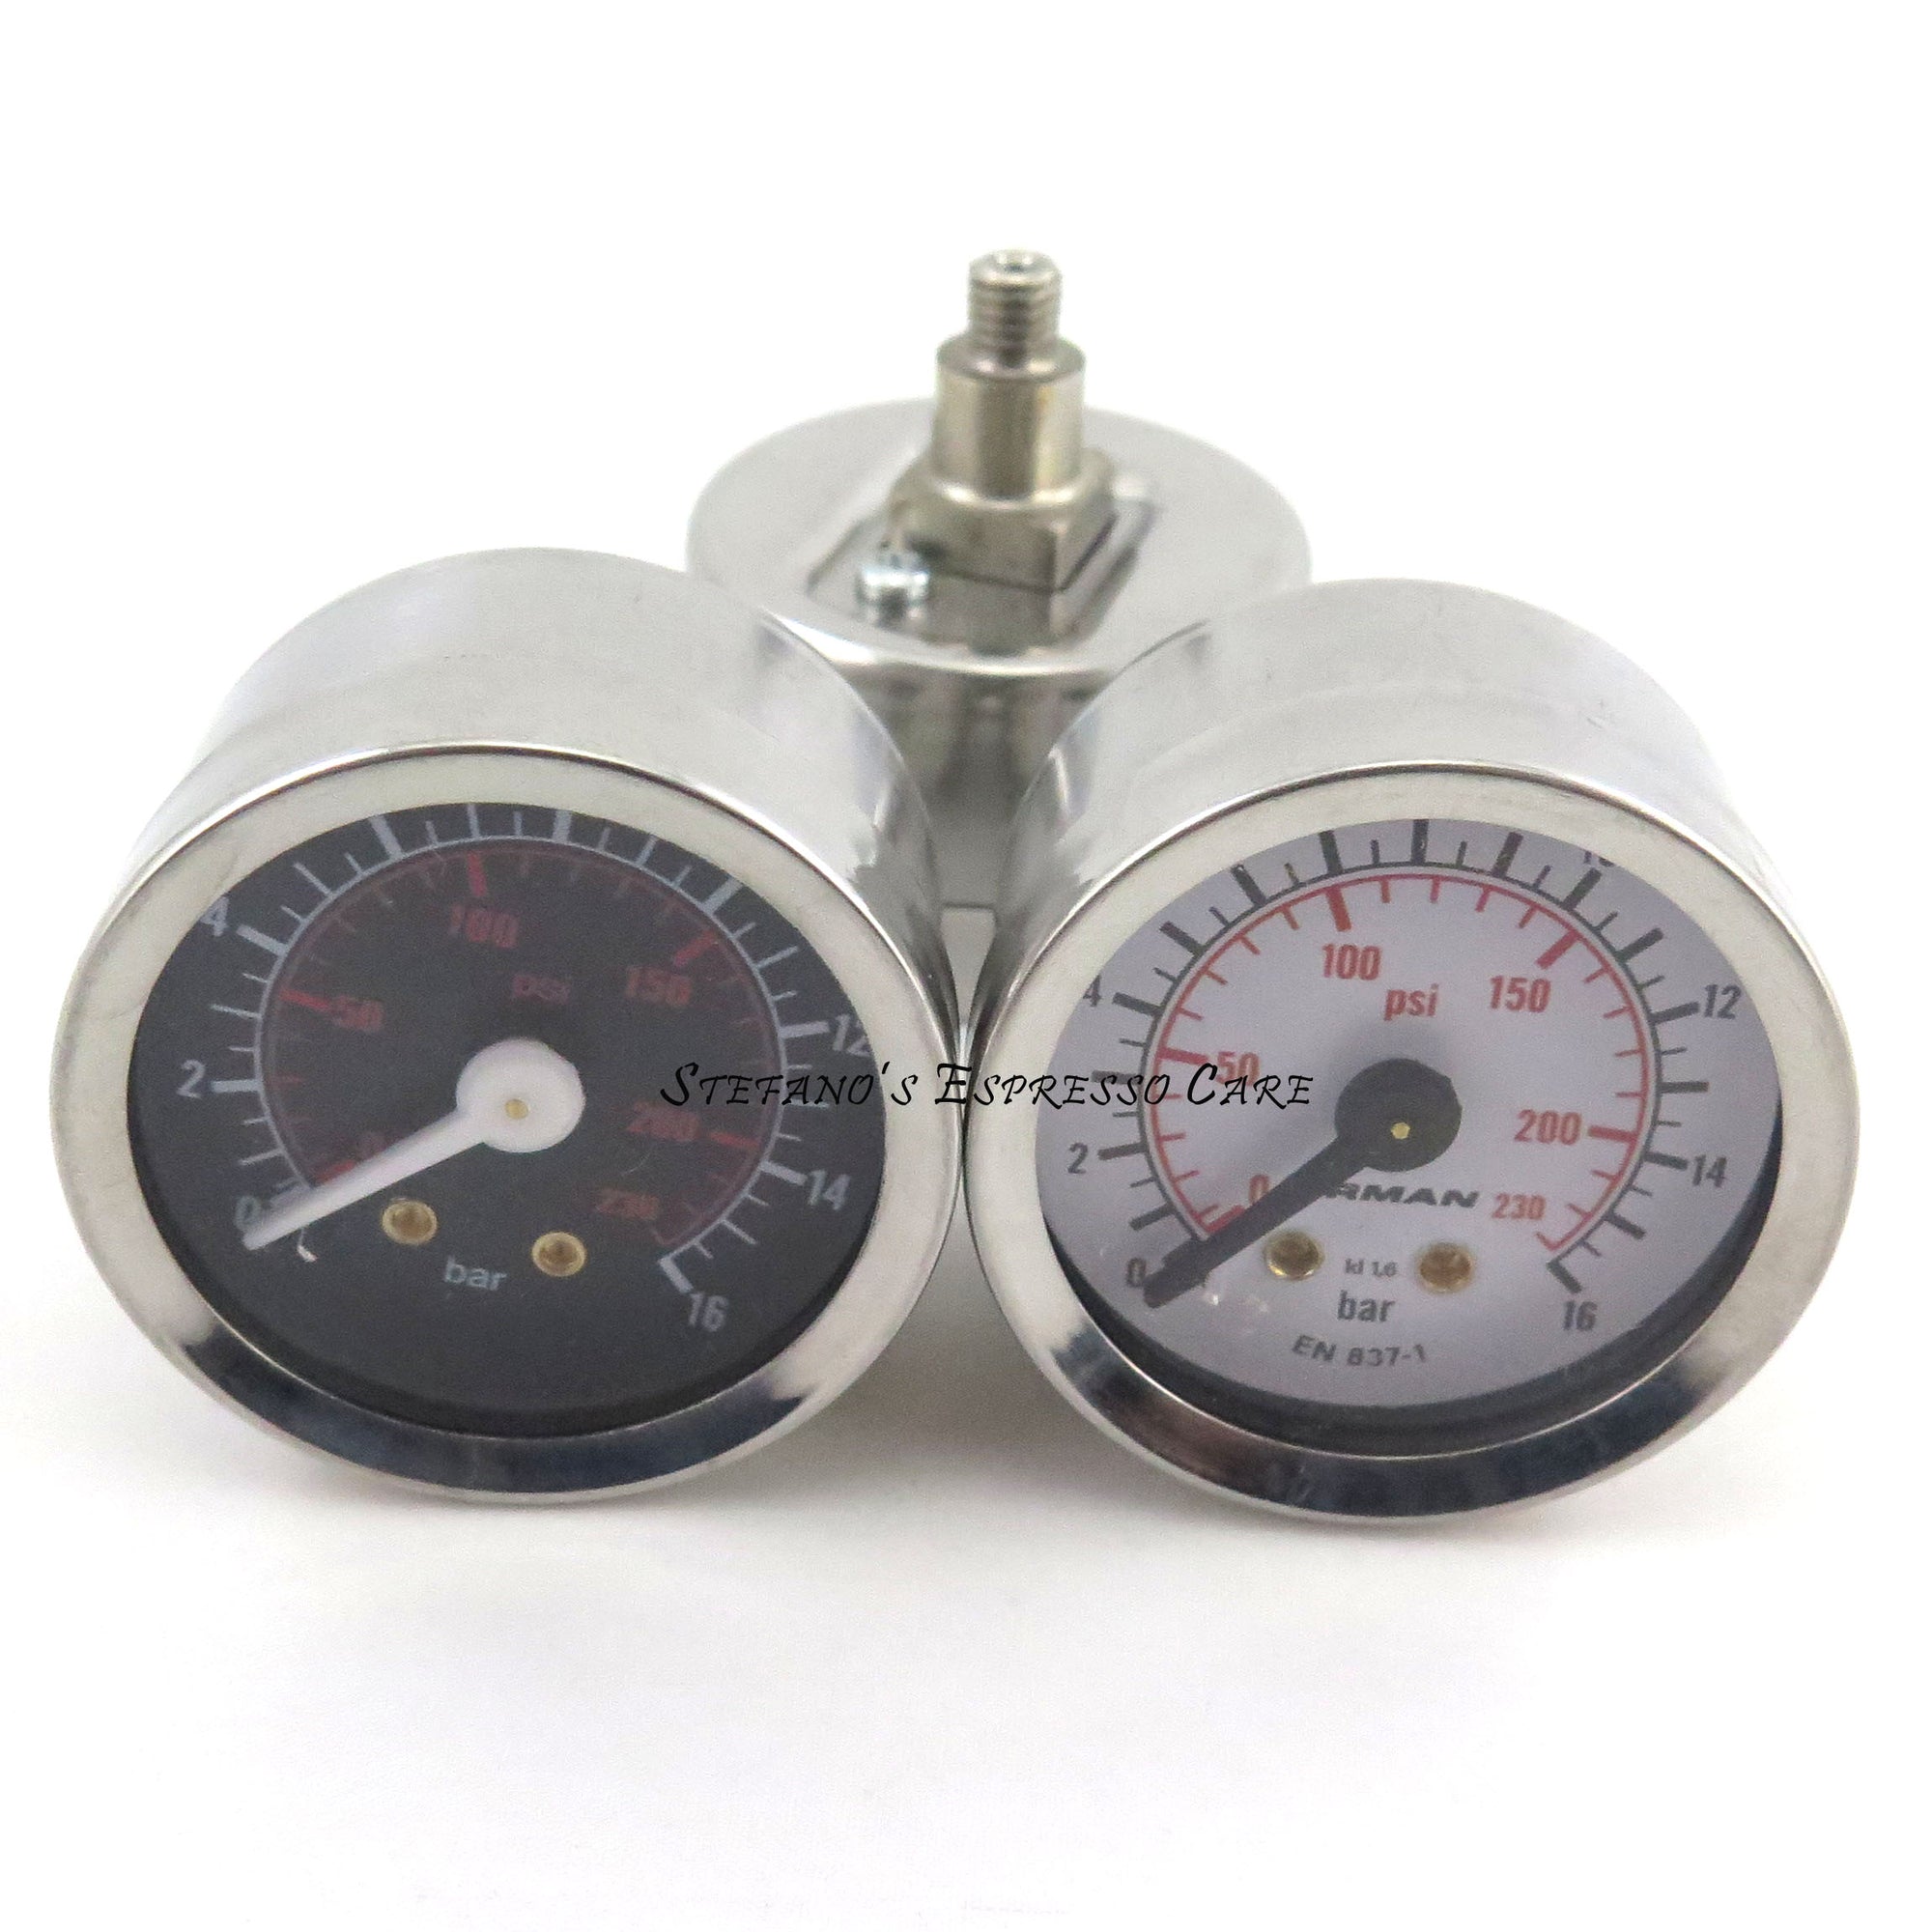 E-61 Grouphead Mounting Gauge for Water Pressure